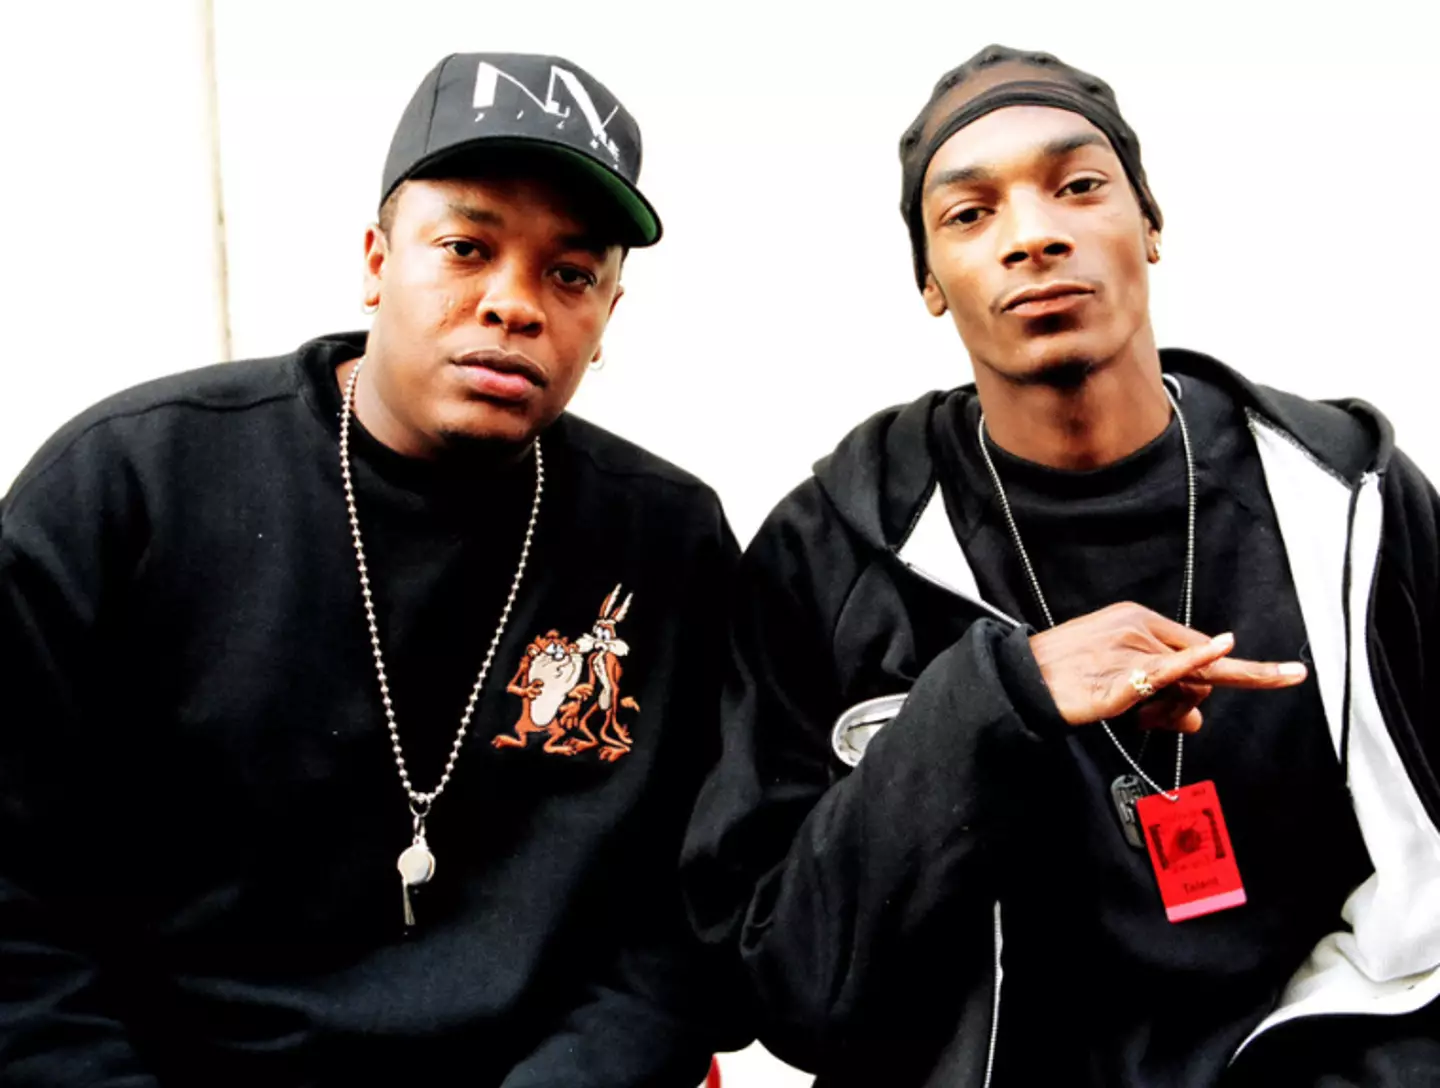 Dr Dre and Snoop worked together on The Chronic.